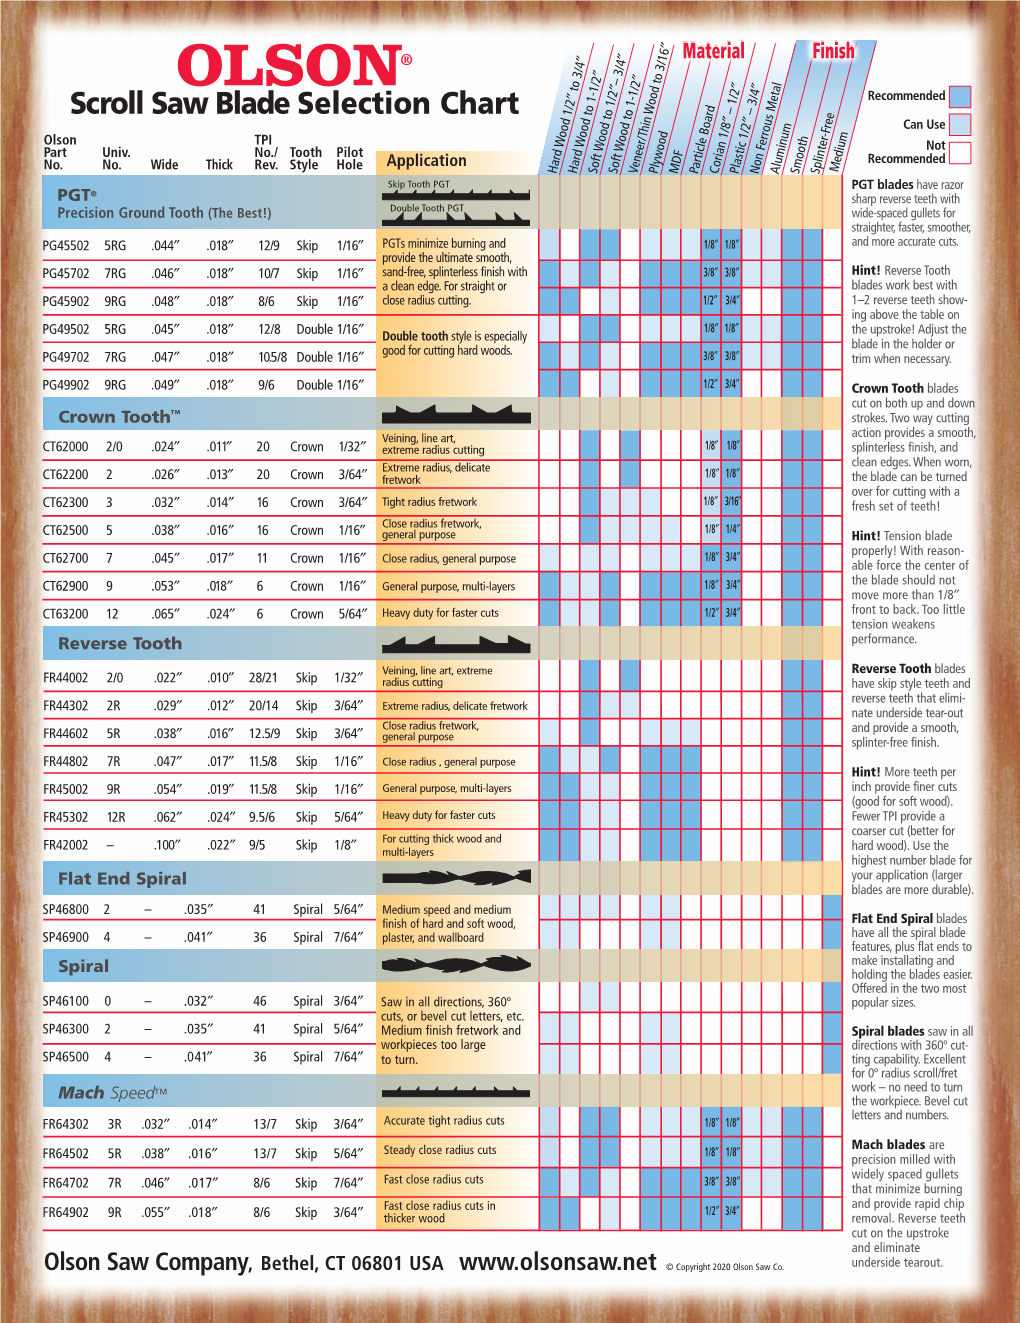 Scroll Saw Blade Selection Chart ″ Recommended Can Use